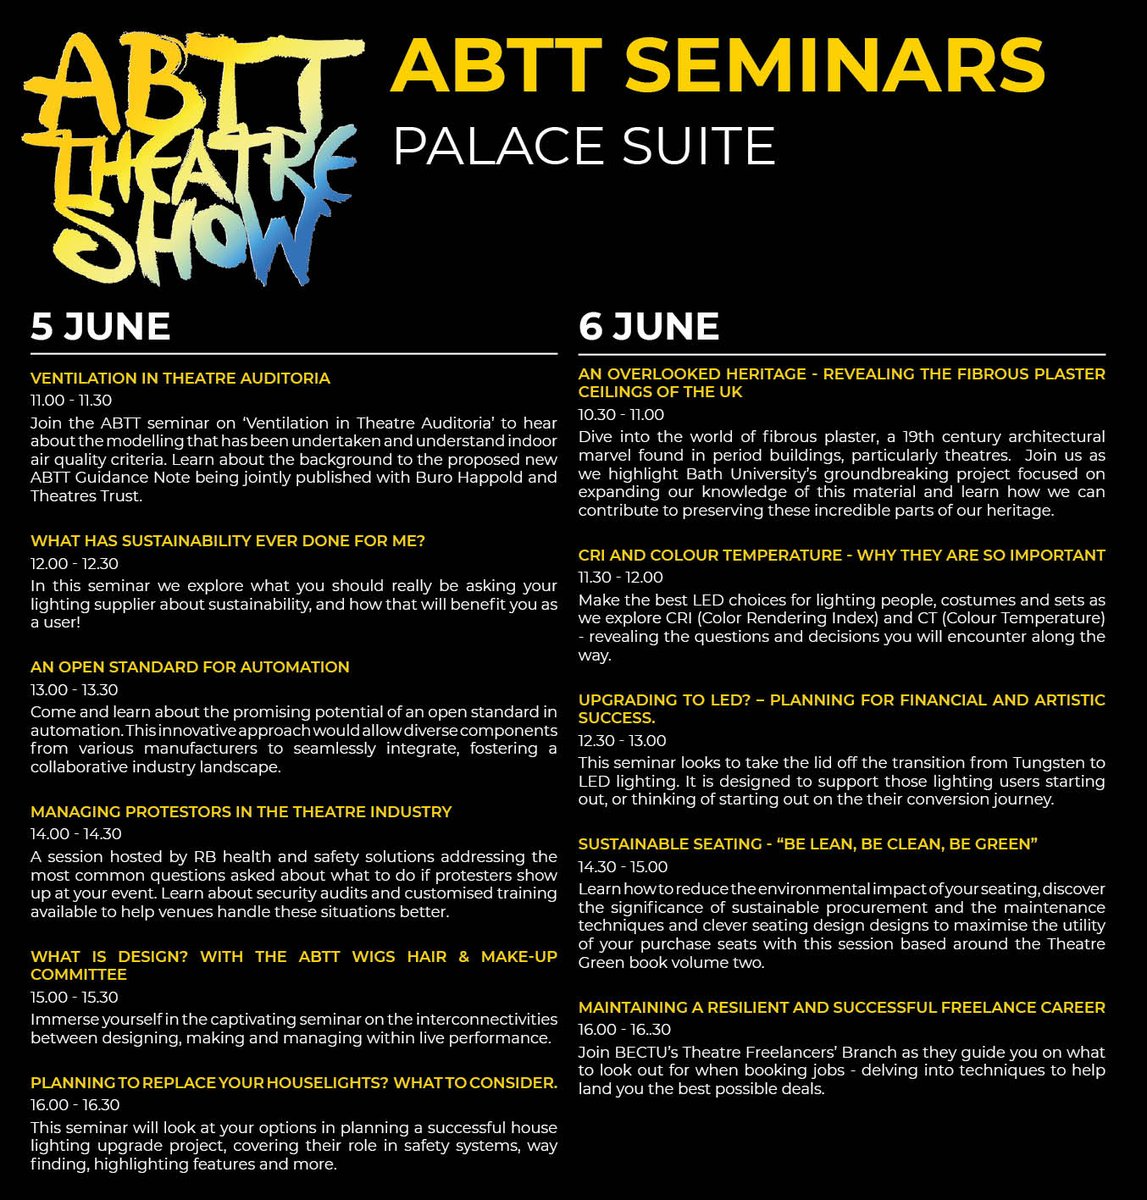 We cannot wait to see you all at the ABTT Theatre Show and look forward to bringing a wide-range of seminars and discussions on various topics currently of interest to the Industry. Find out about the confirmed Seminars here: abtt.org.uk/abtt-theatre-s… #ABTT #Theatre #backstage